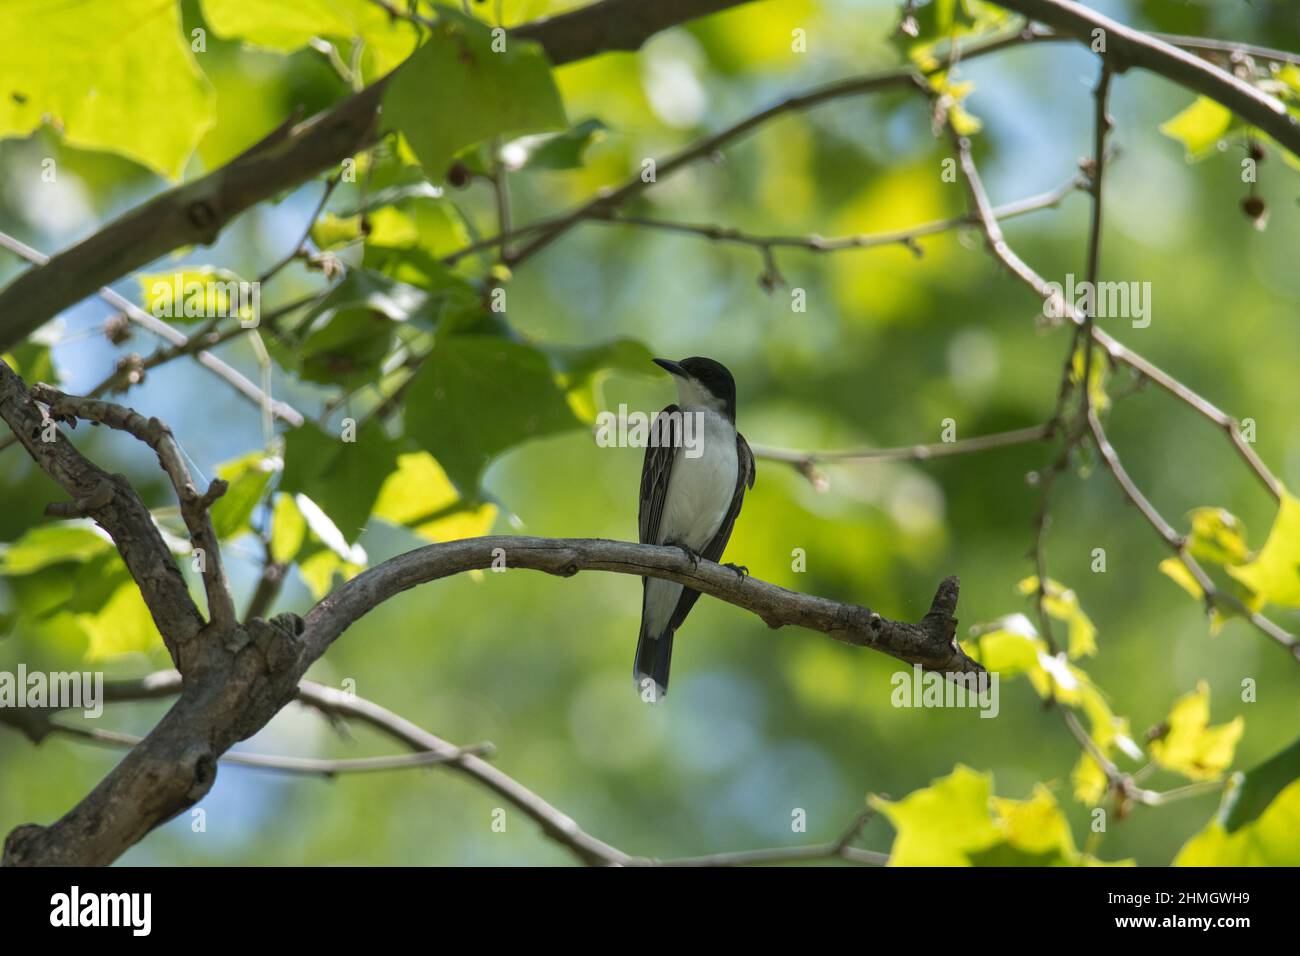 Eastern Kingbird perched on a branch among green leaves Stock Photo